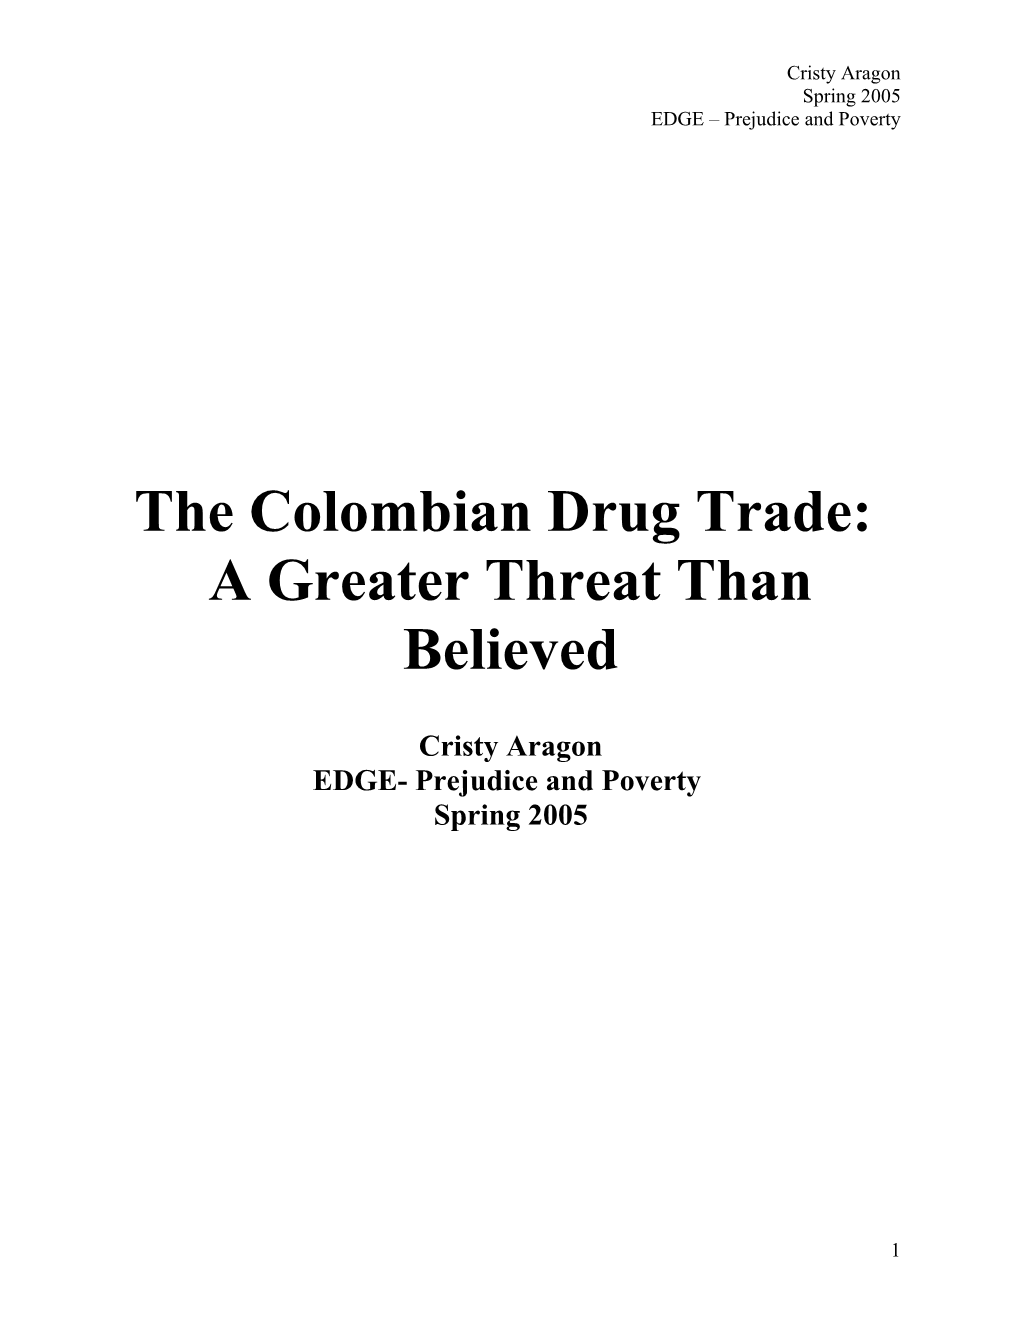 The Colombian Drug Trade